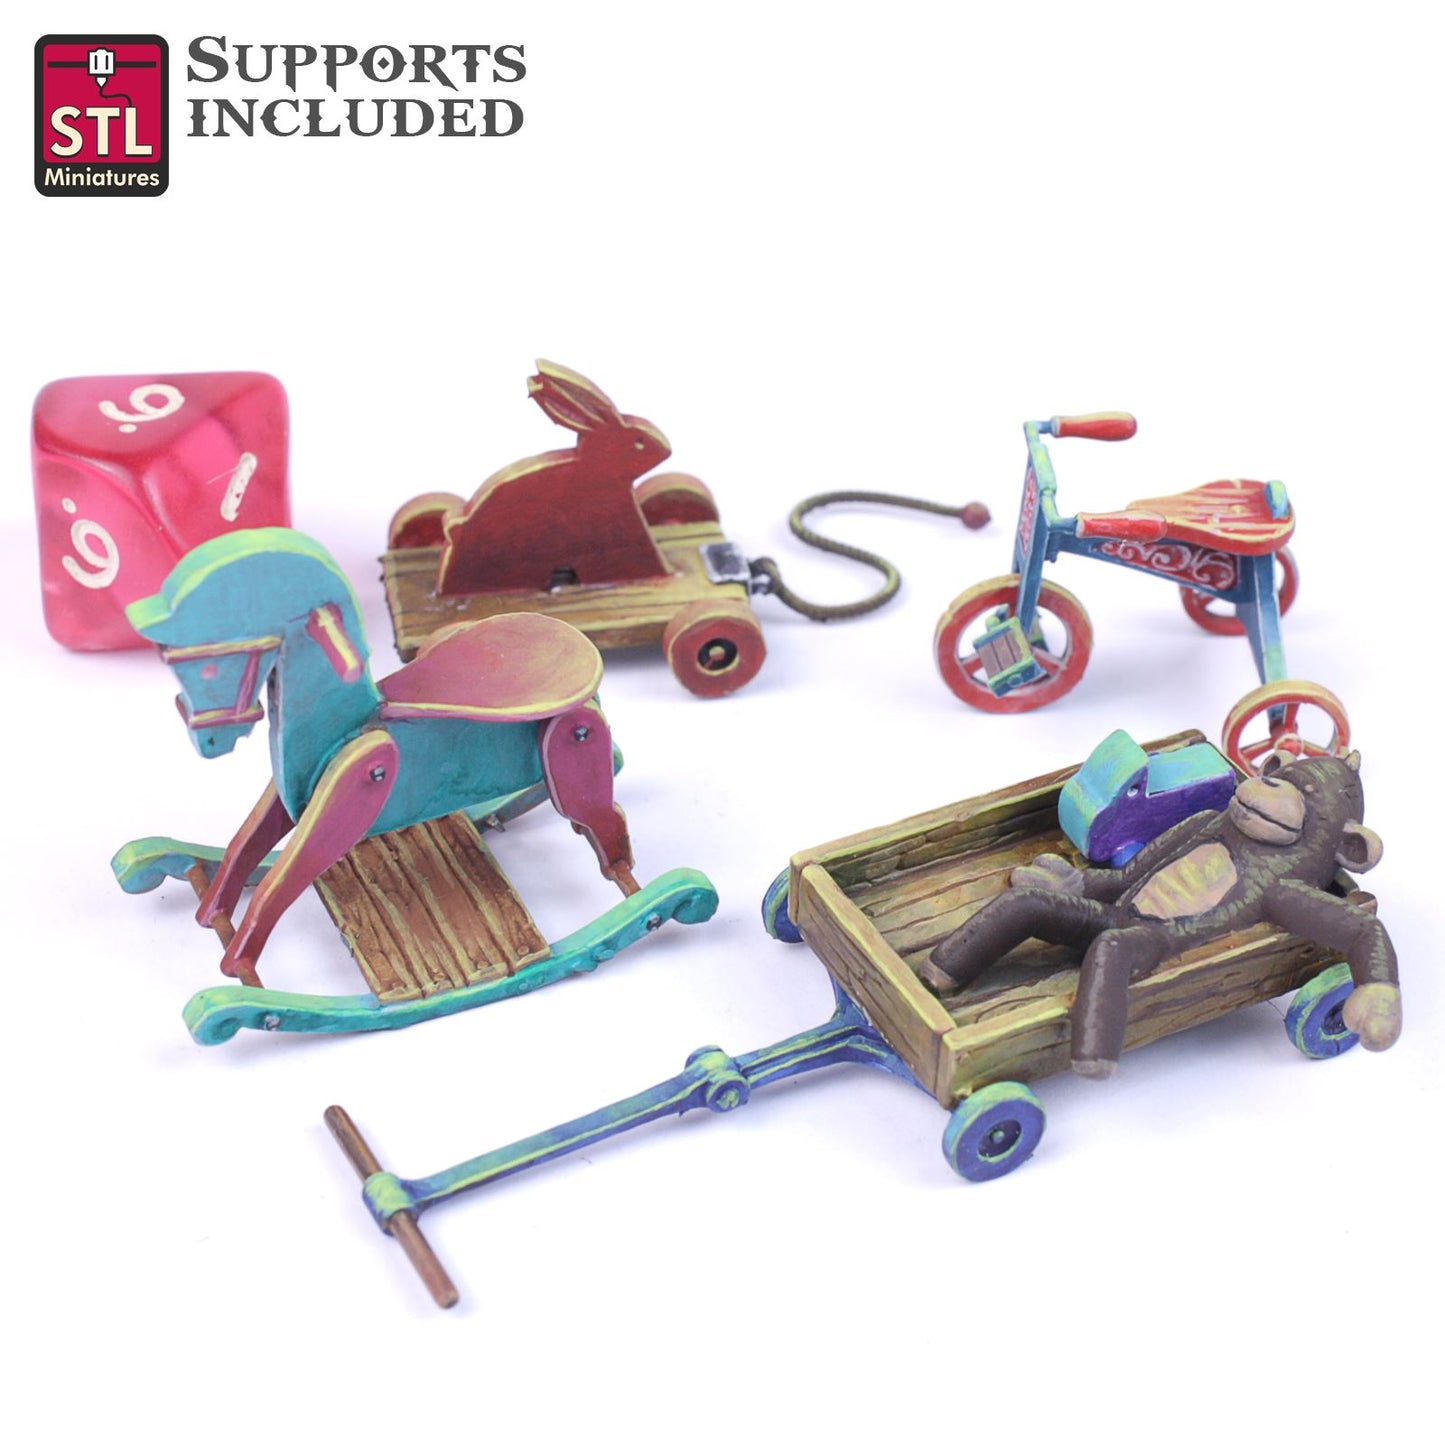 Townsfolks Bunny Cart Monkeycart TricycleWoodHorse Scale Models STLMiniatures